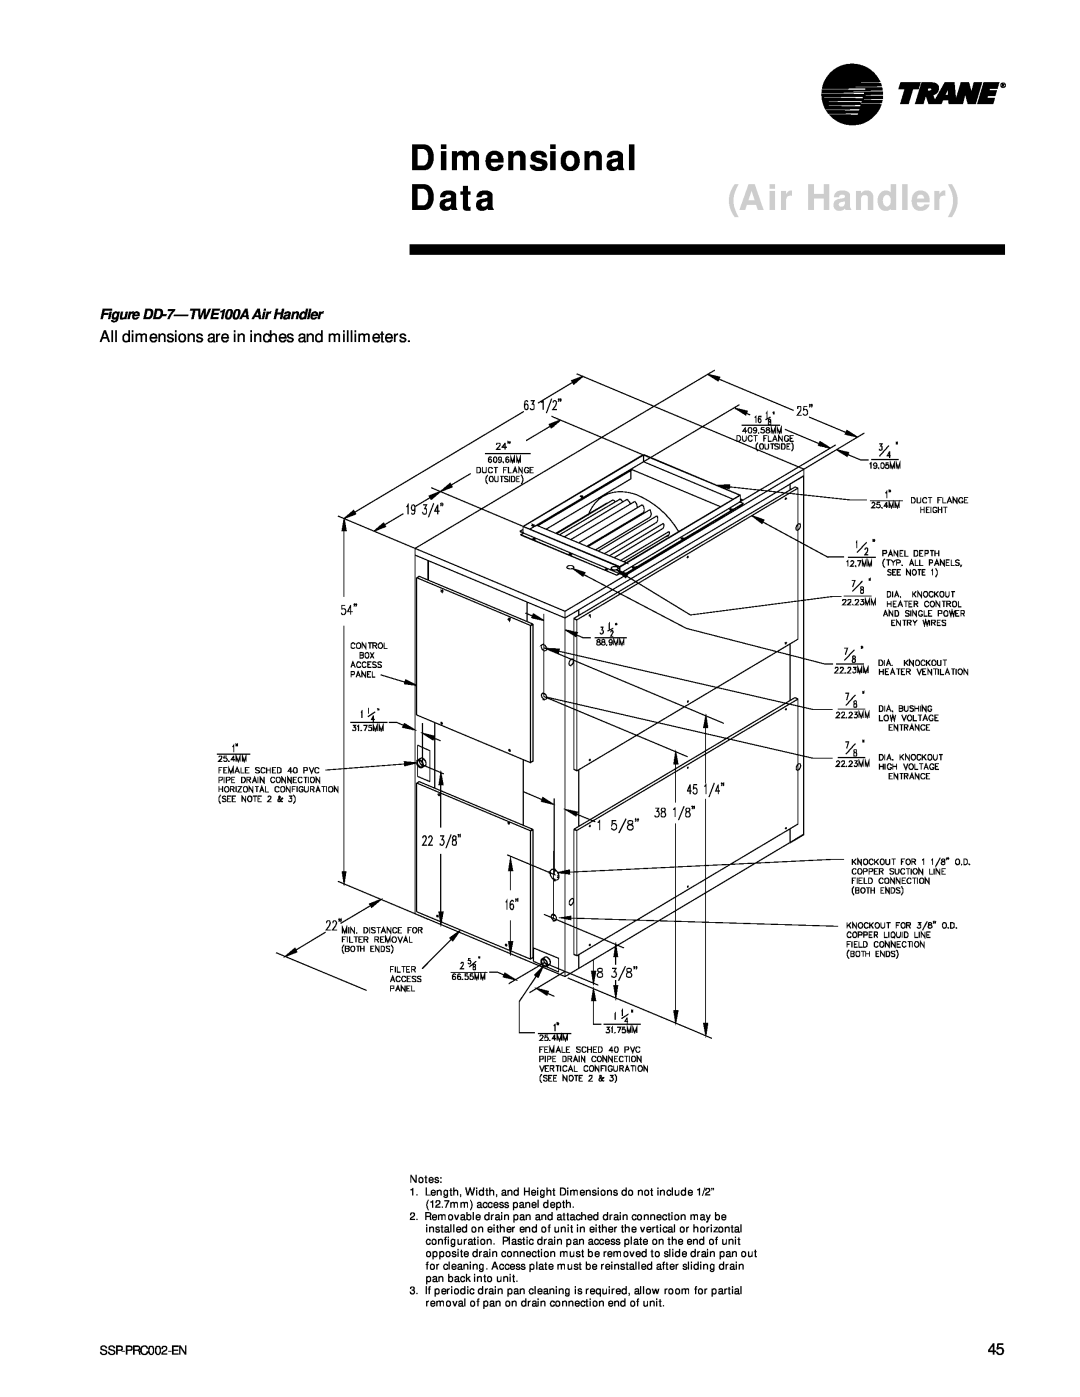 Trane TWE200B, TWA075A Dimensional, Data, All dimensions are in inches and millimeters, Figure DD-7-TWE100AAir Handler 